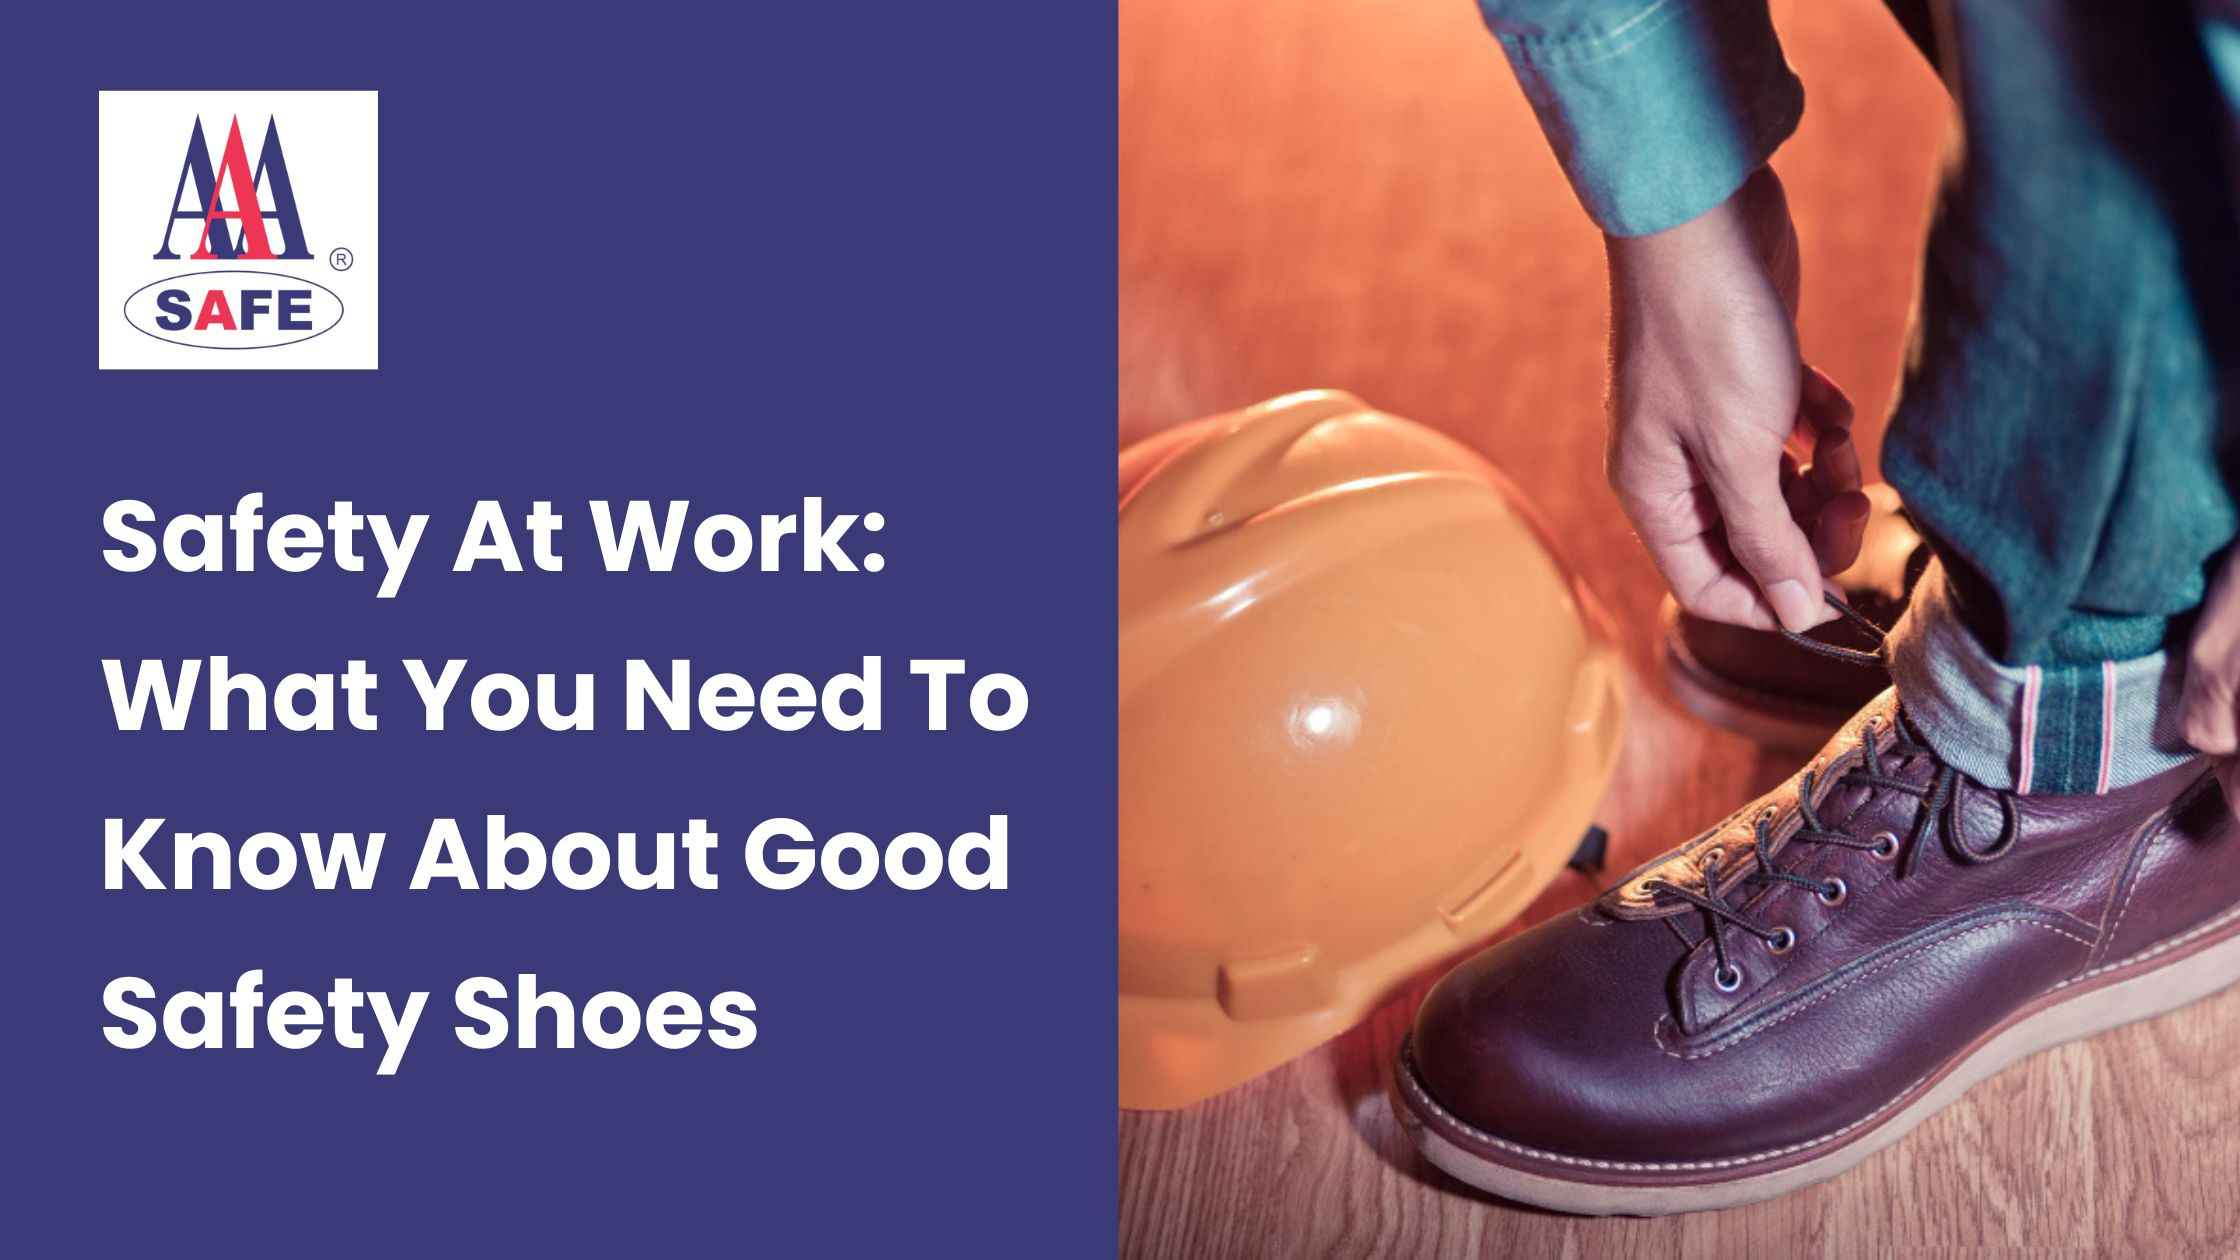 Safety At Work: What You Need To Know About Good Safety Shoes